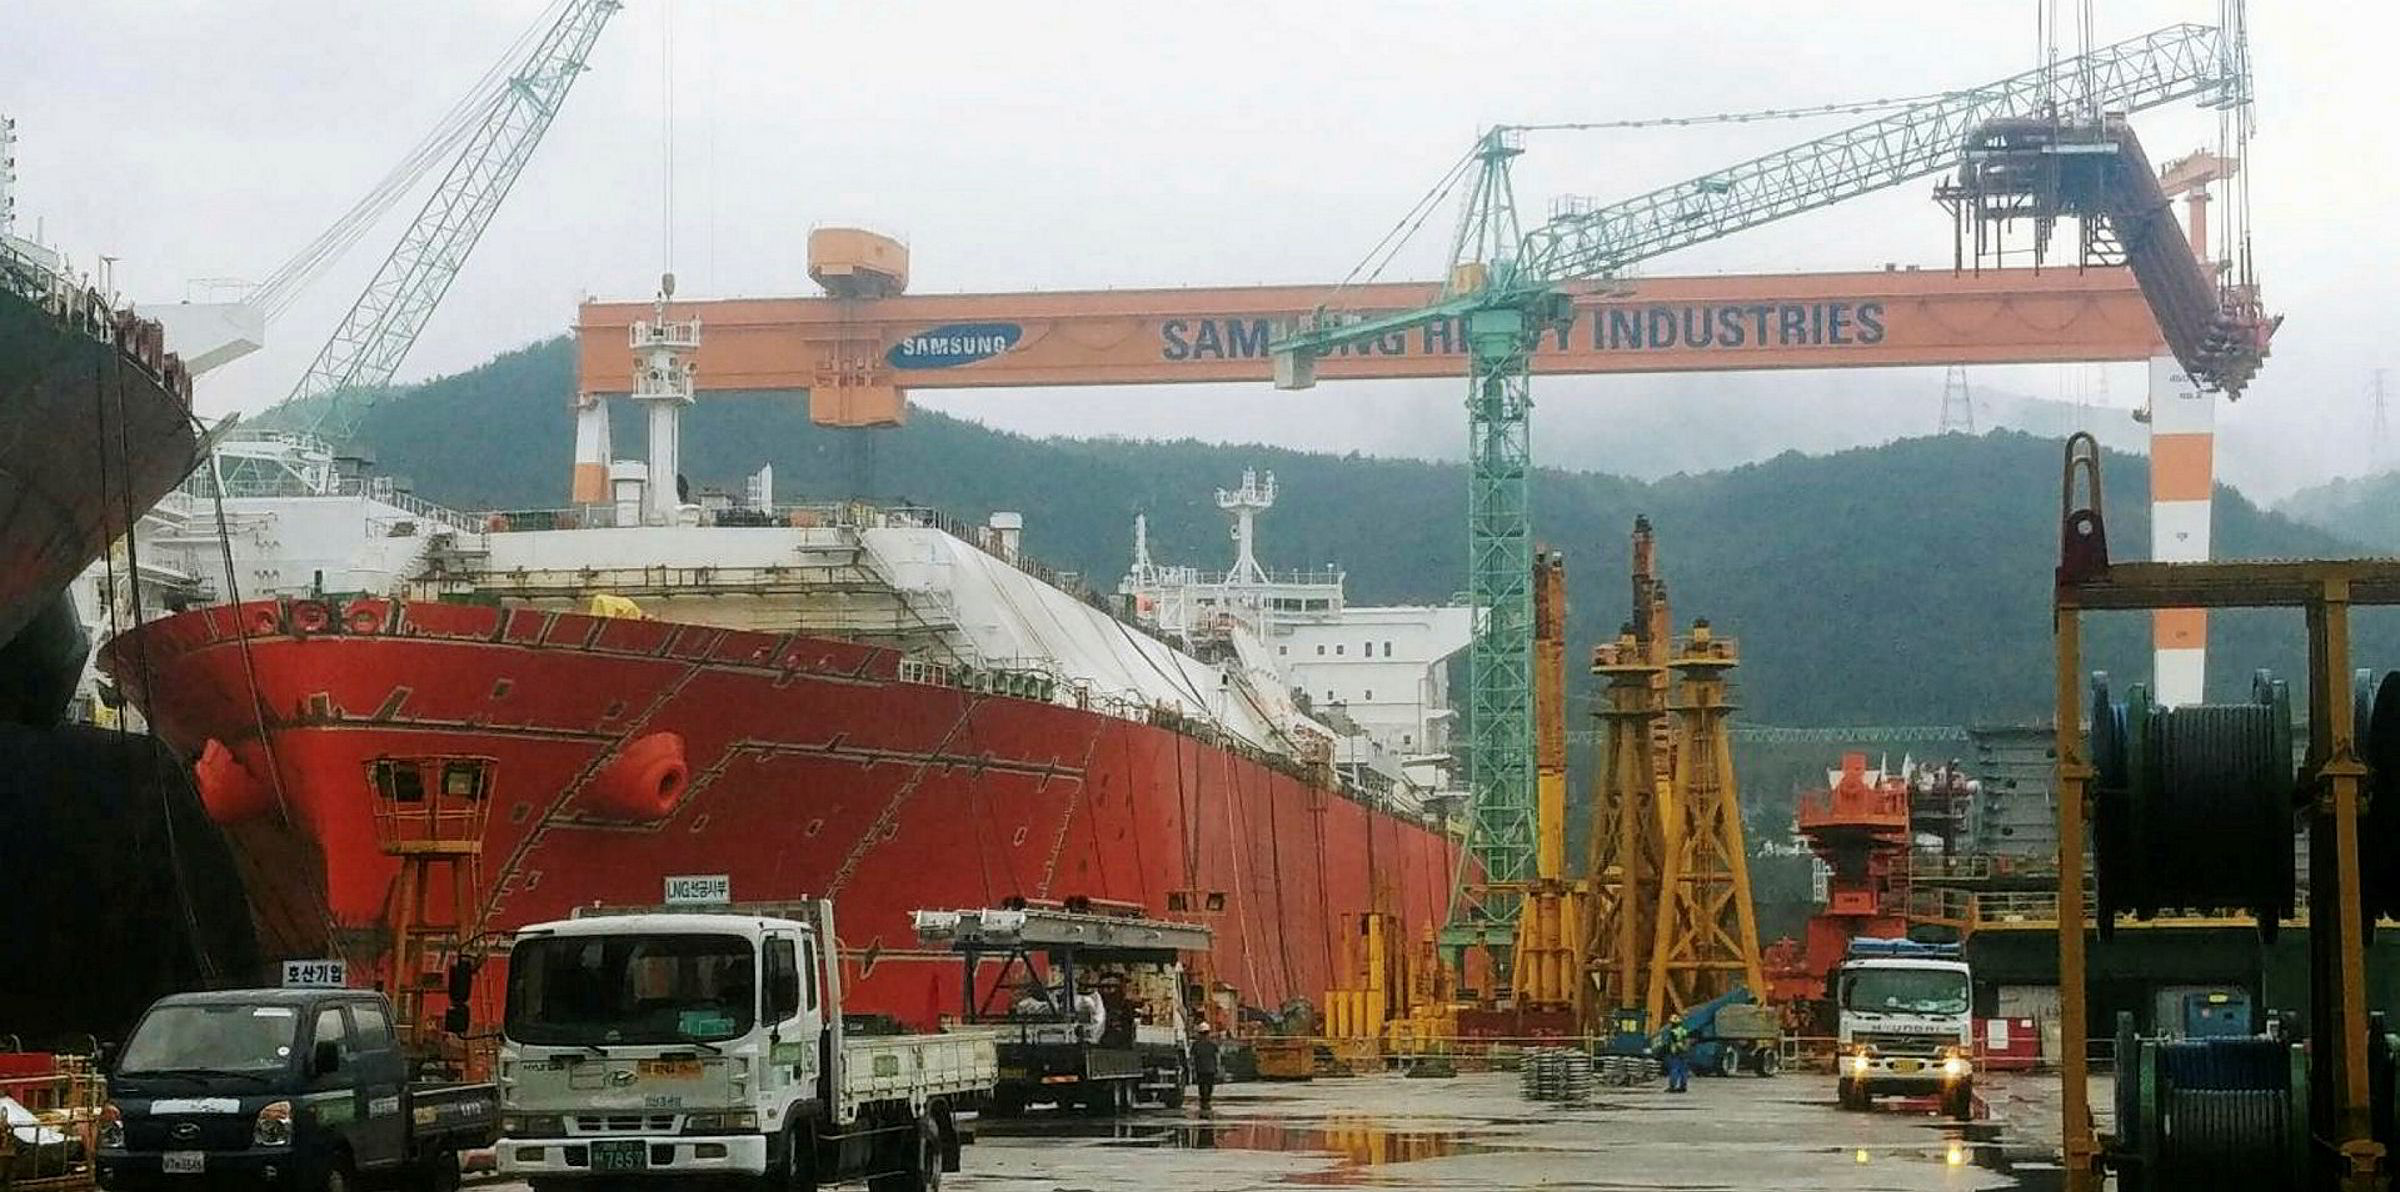 samsung heavy industries reports heavy loss as costs increase | tradewinds